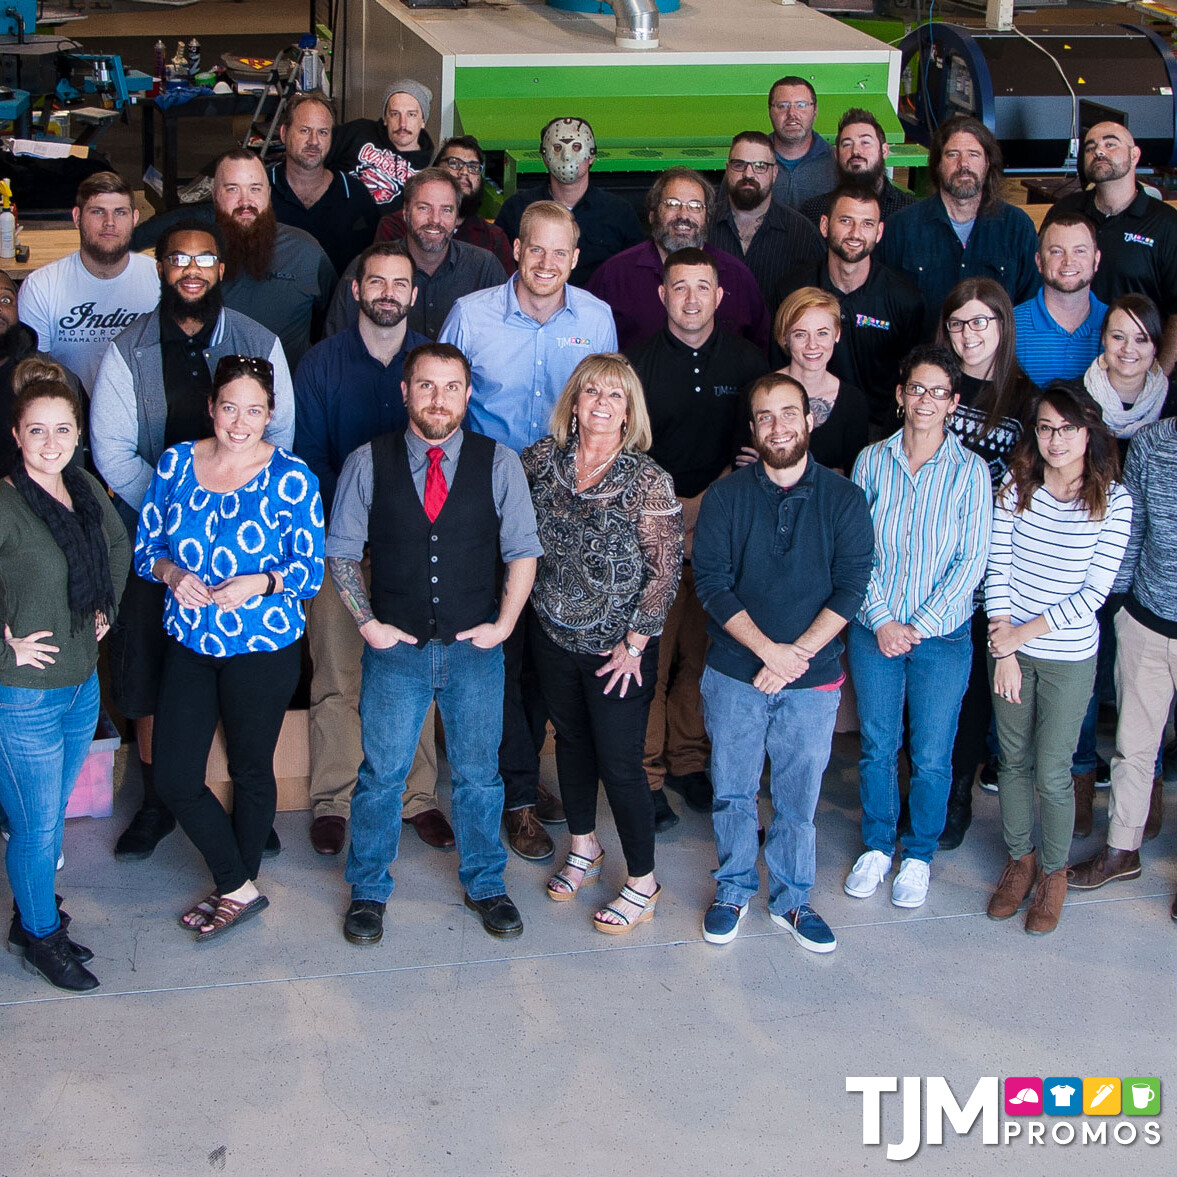 We're Thankful for our TJM Team!